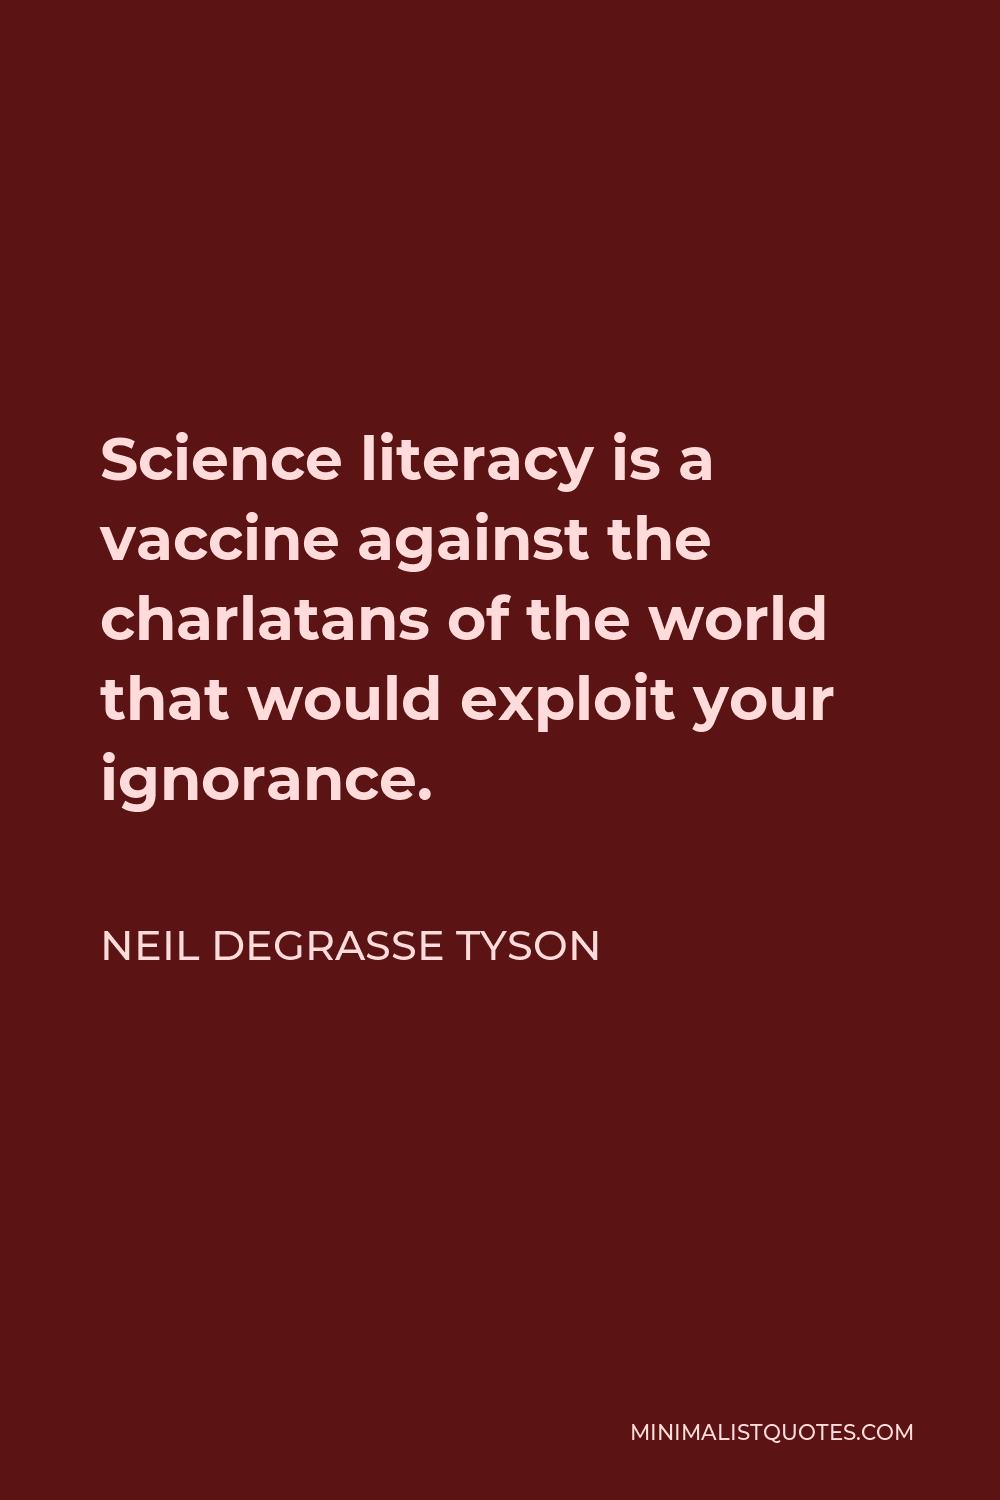 Neil deGrasse Tyson Quote - Science literacy is a vaccine against the charlatans of the world that would exploit your ignorance.